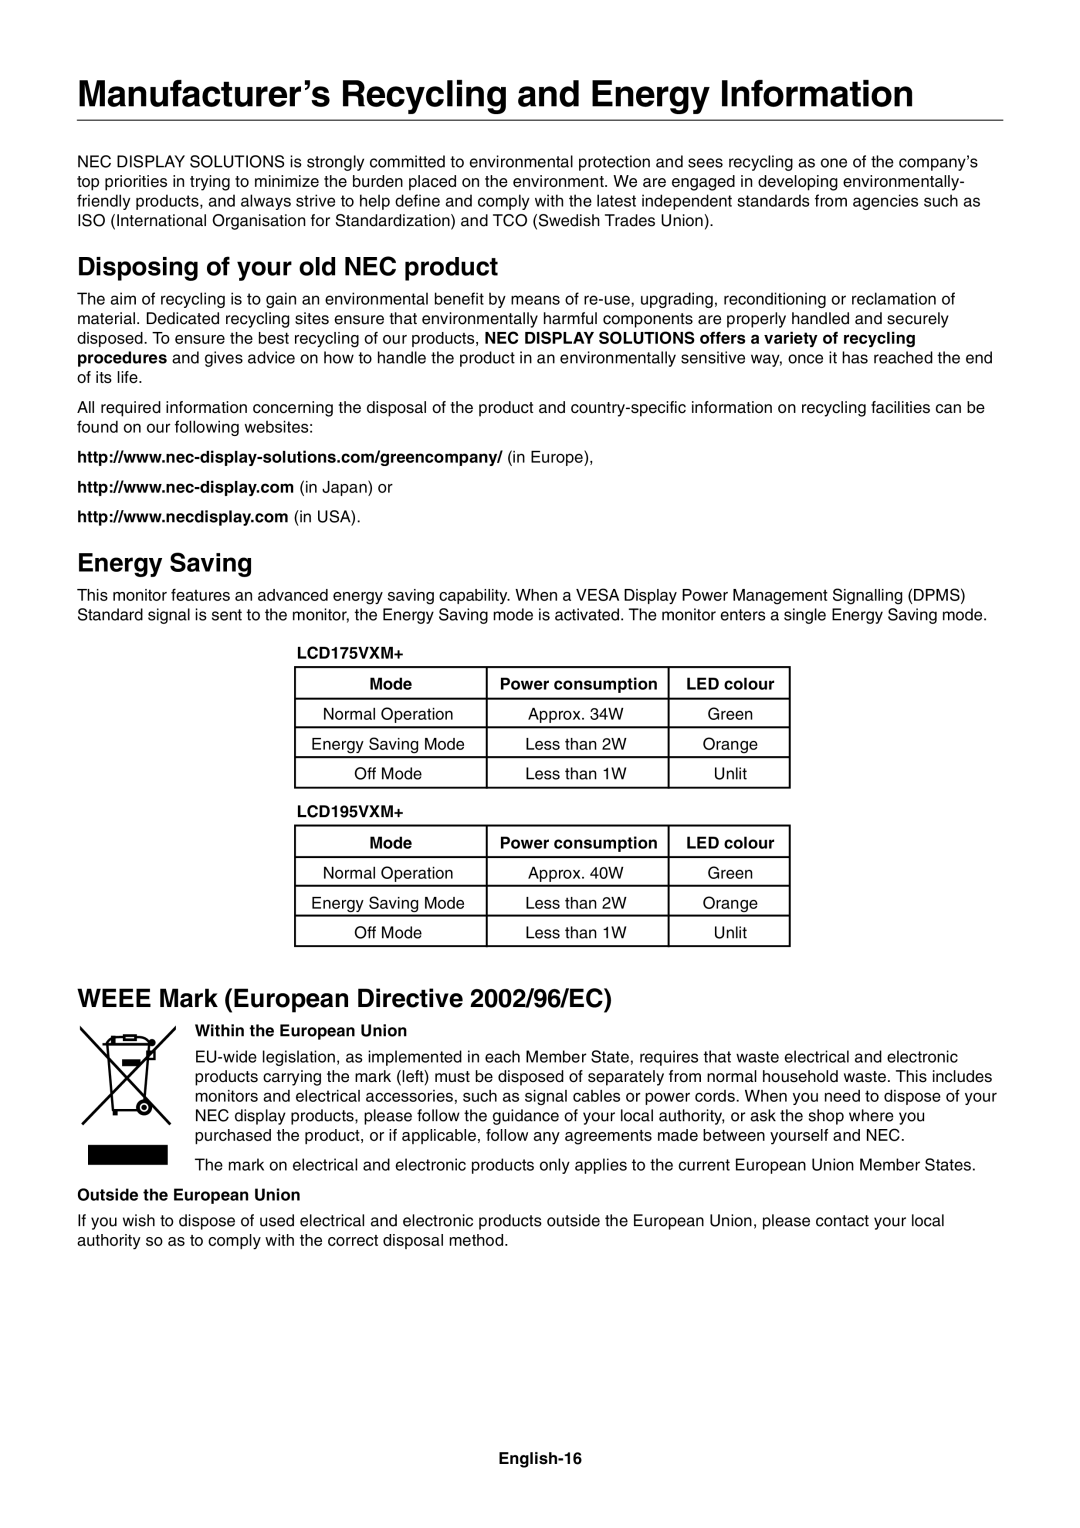 NEC LCD175VXM+ ManufacturerÕs Recycling and Energy Information, Disposing of your old NEC product, Energy Saving 